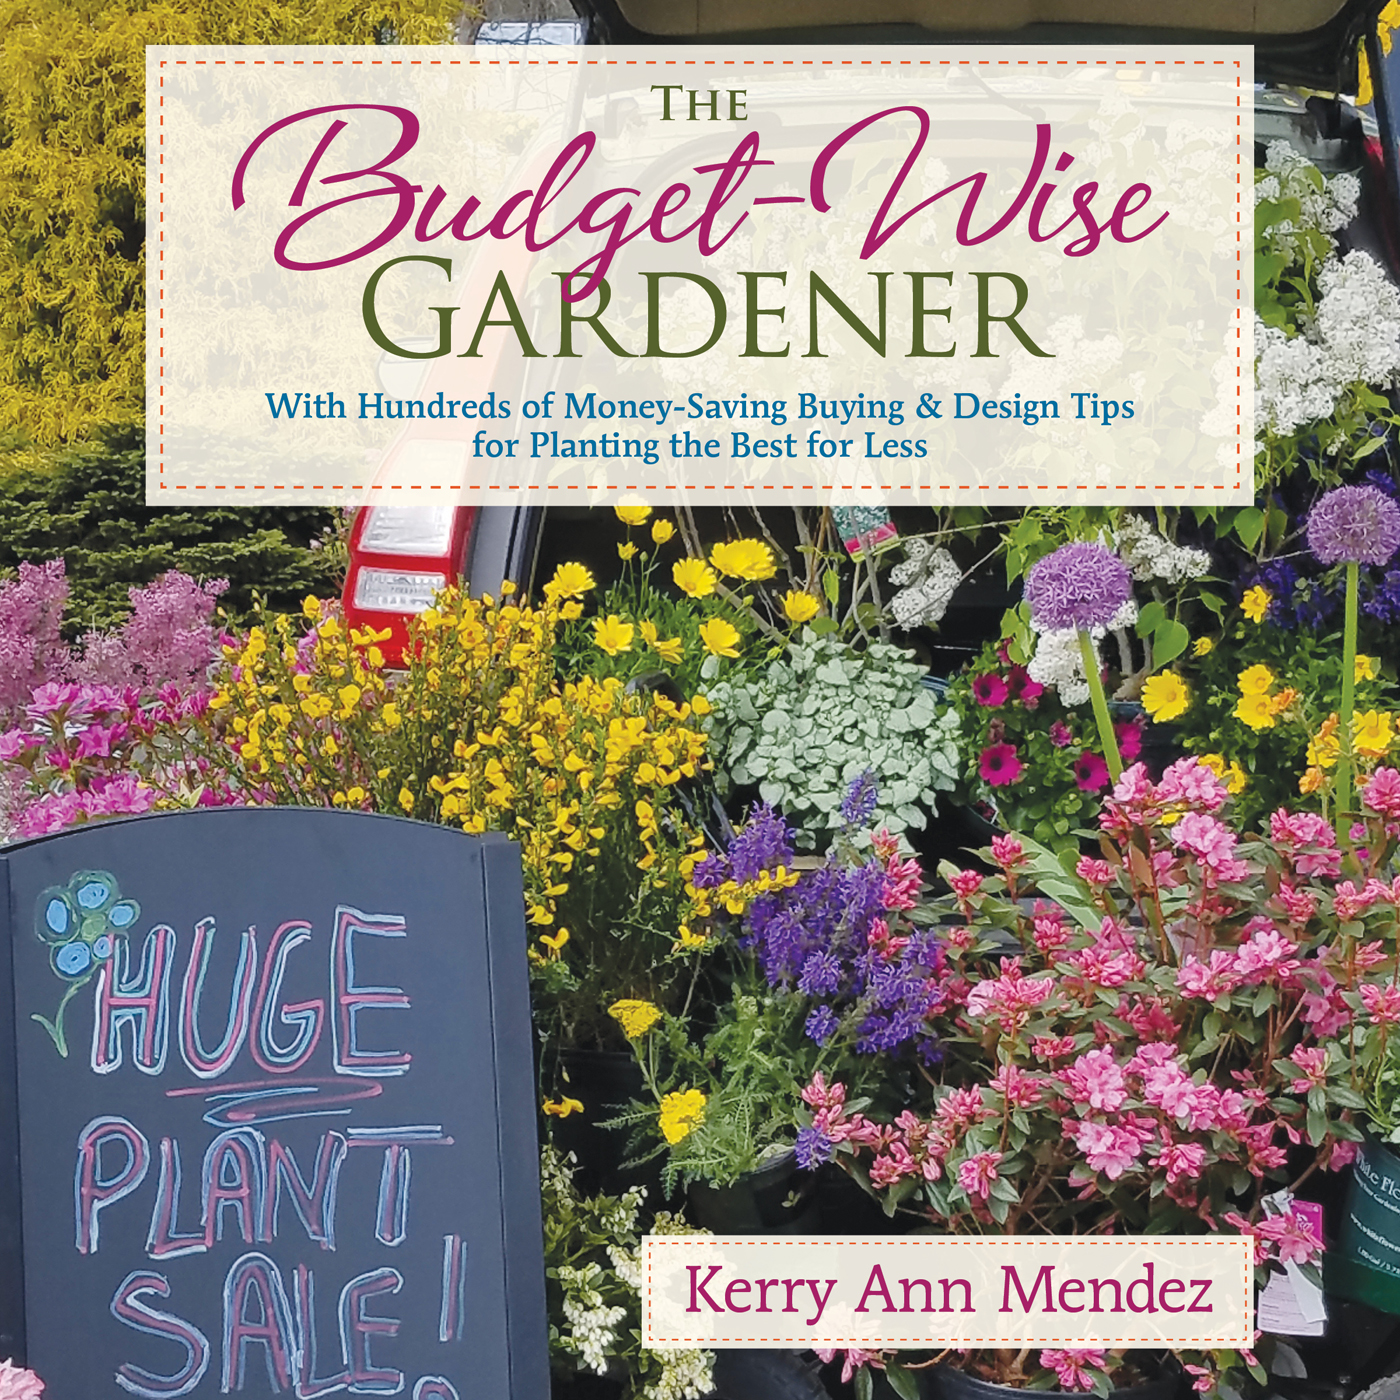 Praise for Kerry Ann Mendez and The Budget-Wise Gardener Kerry Ann - photo 1